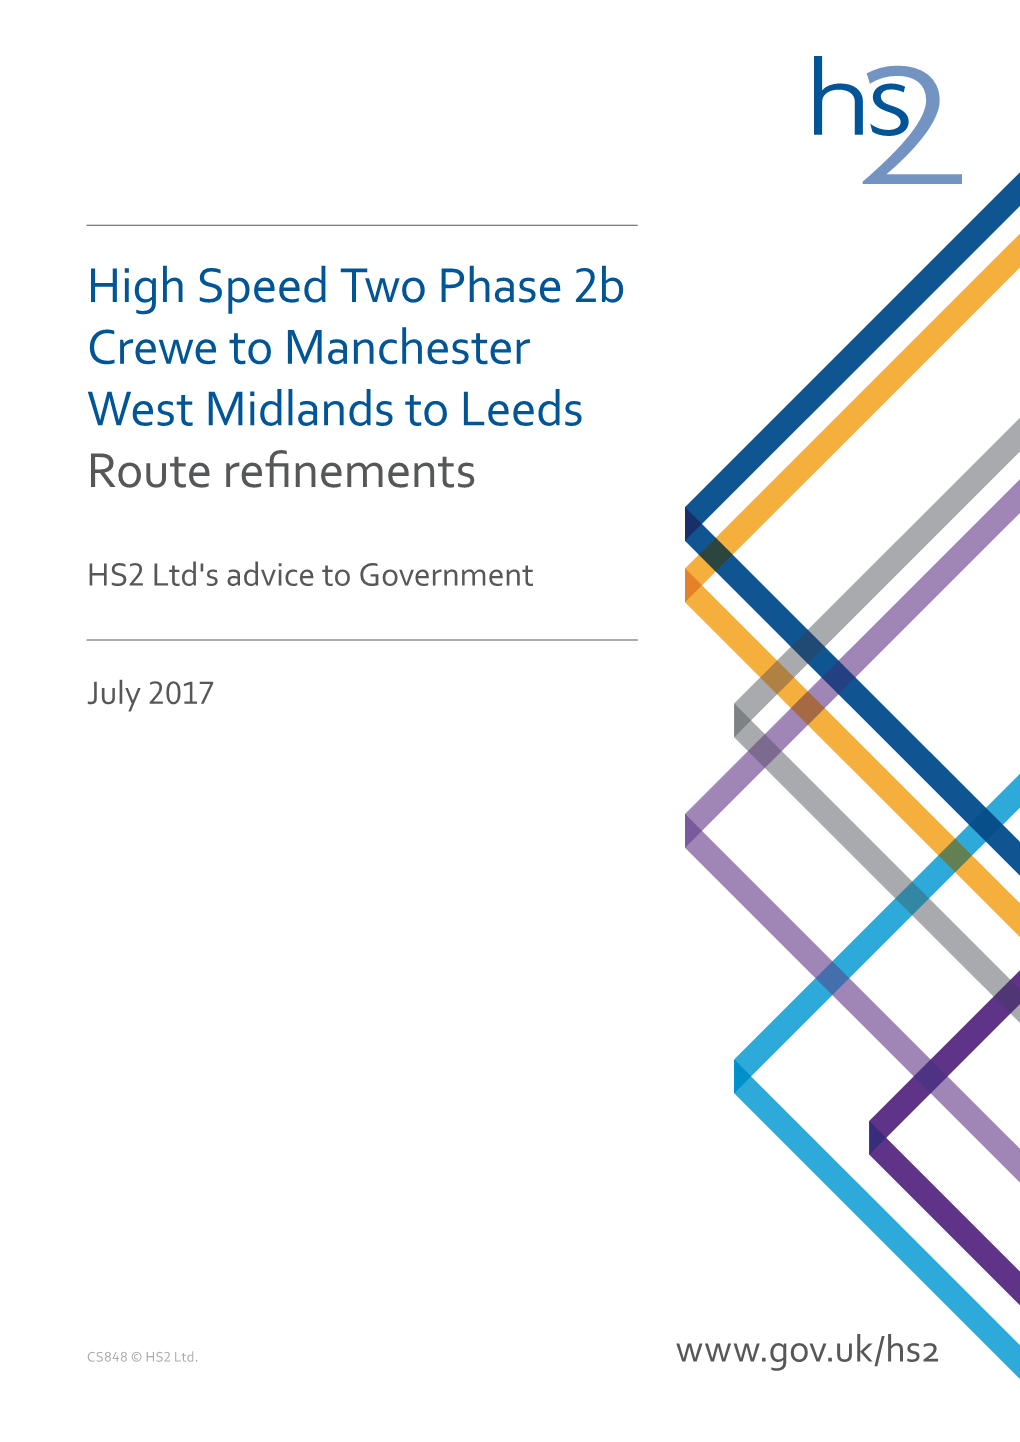 High Speed Two Phase 2B Crewe to Manchester West Midlands to Leeds Route Refinements